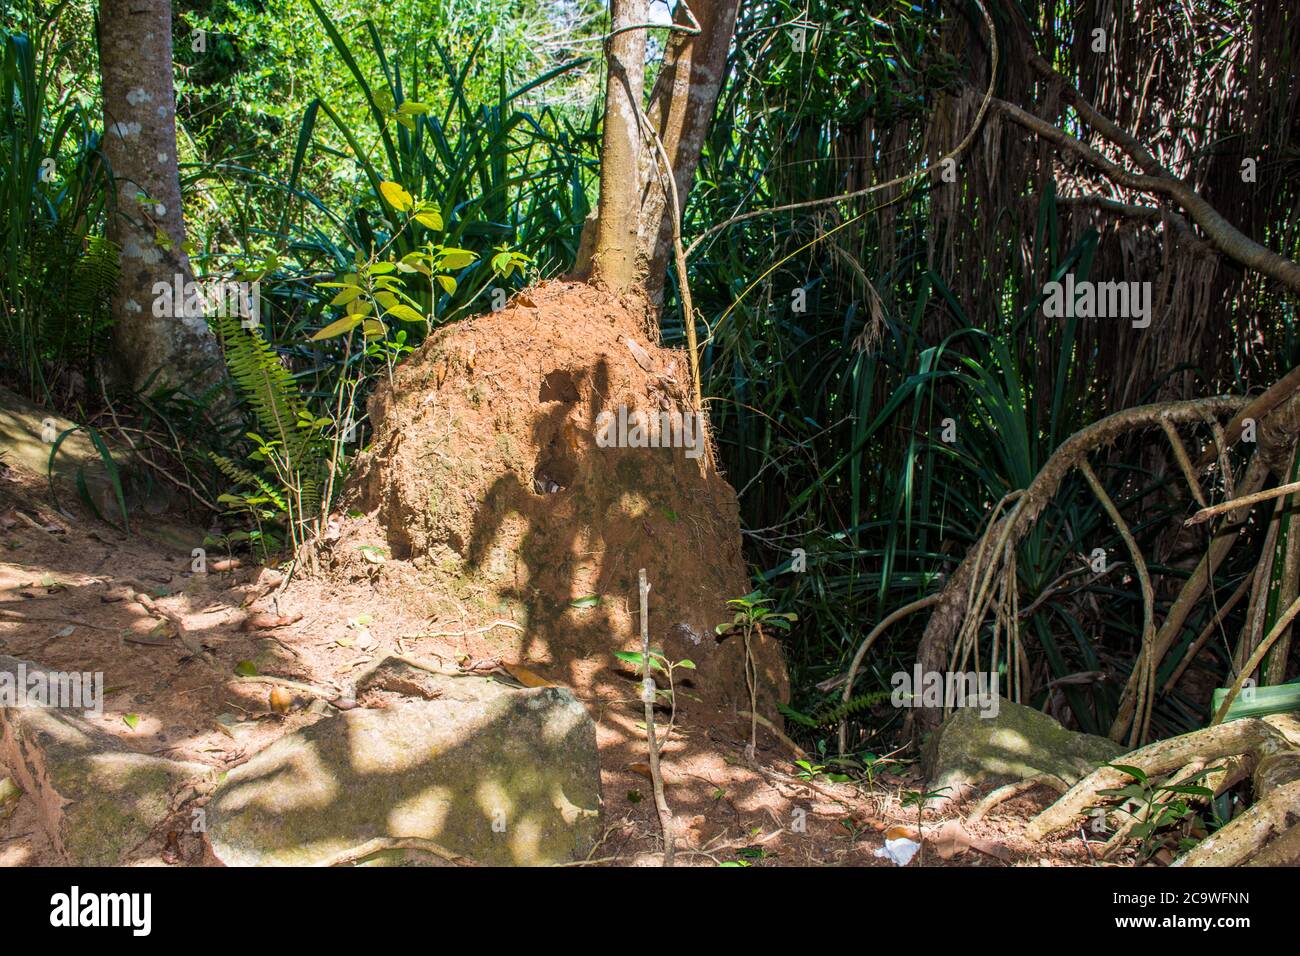 King cobra burrow located in a tropical forest.. Sri Lanka. Stock Photo